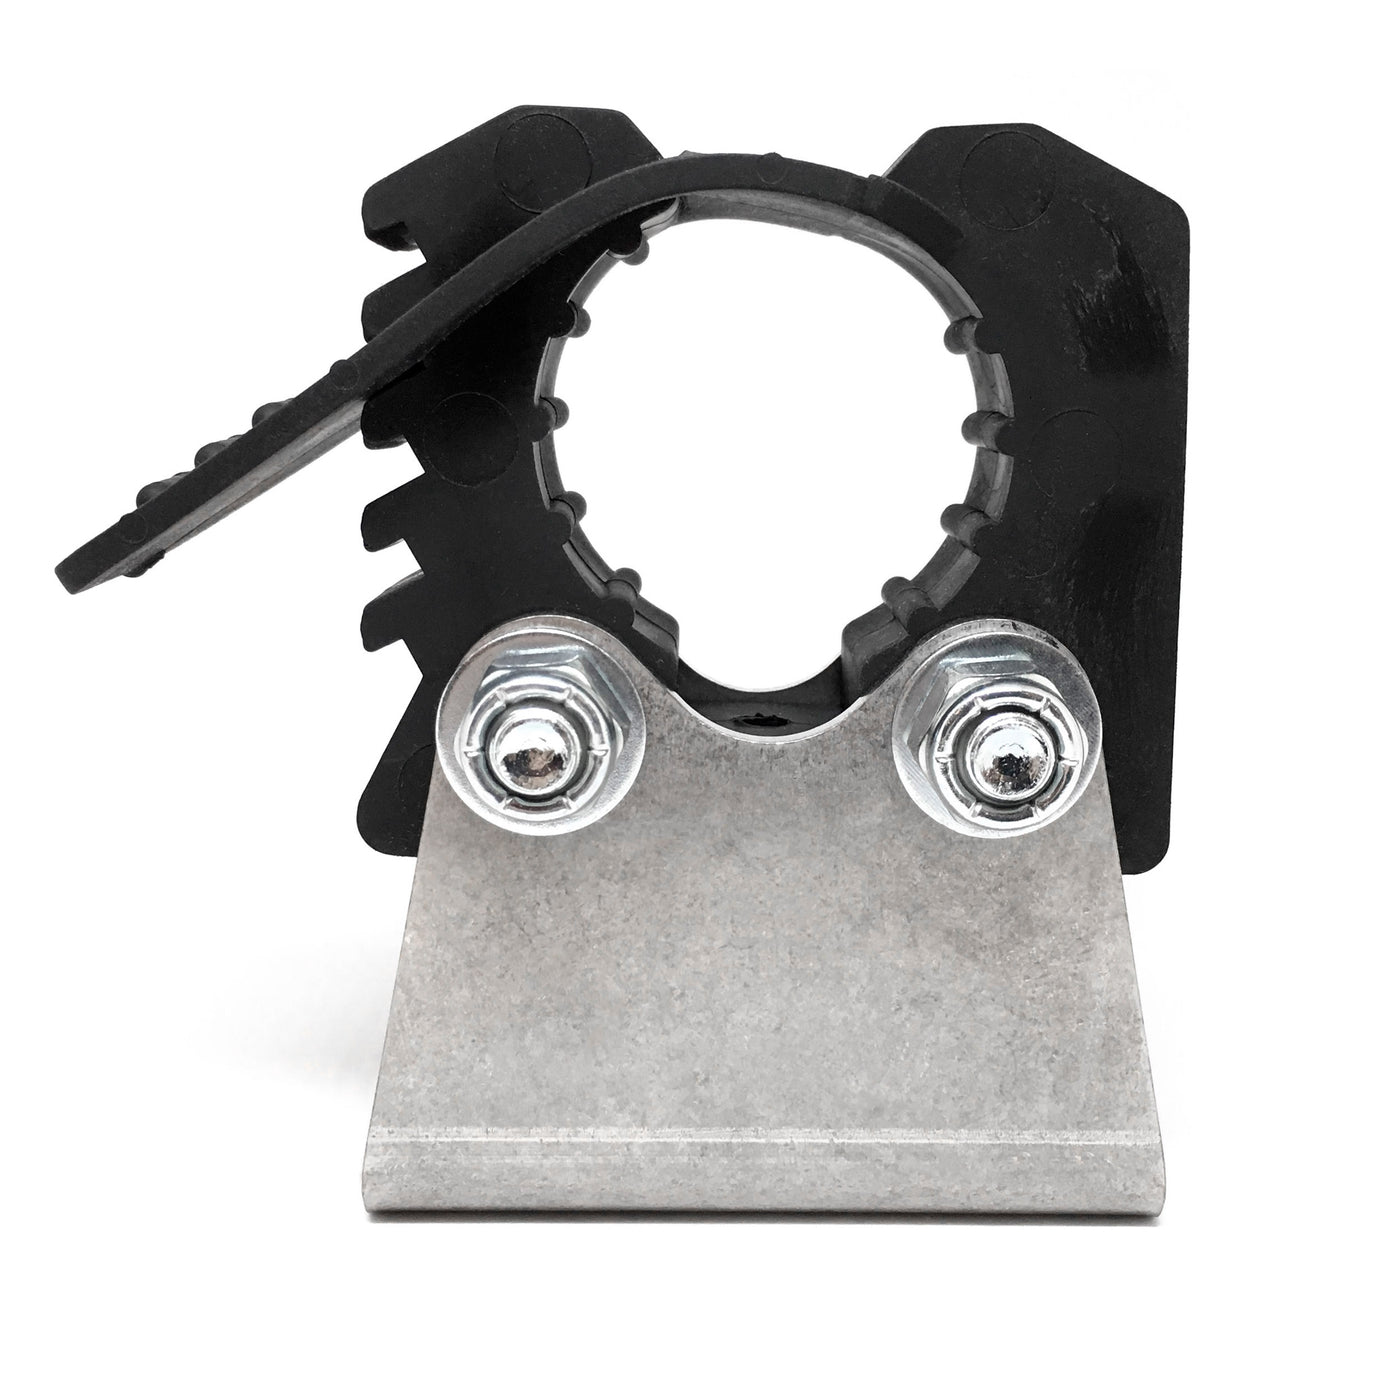  QUICK FIST Mini Clamp for mounting tools & equipment 5